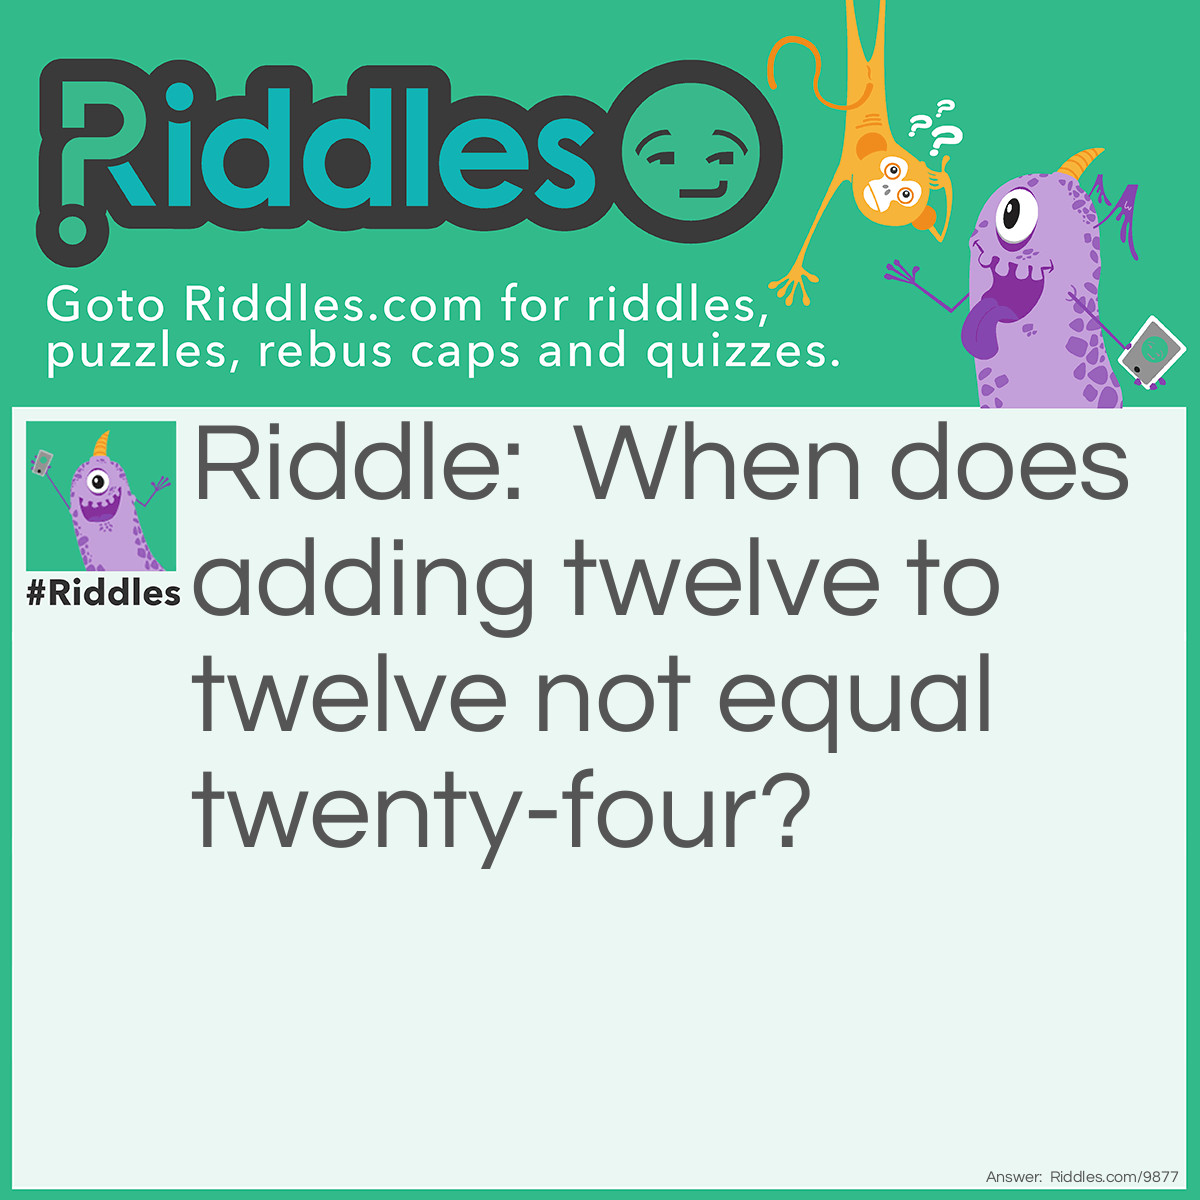 Riddle: When does adding twelve to twelve not equal twenty-four? Answer: When it's on a clock face!